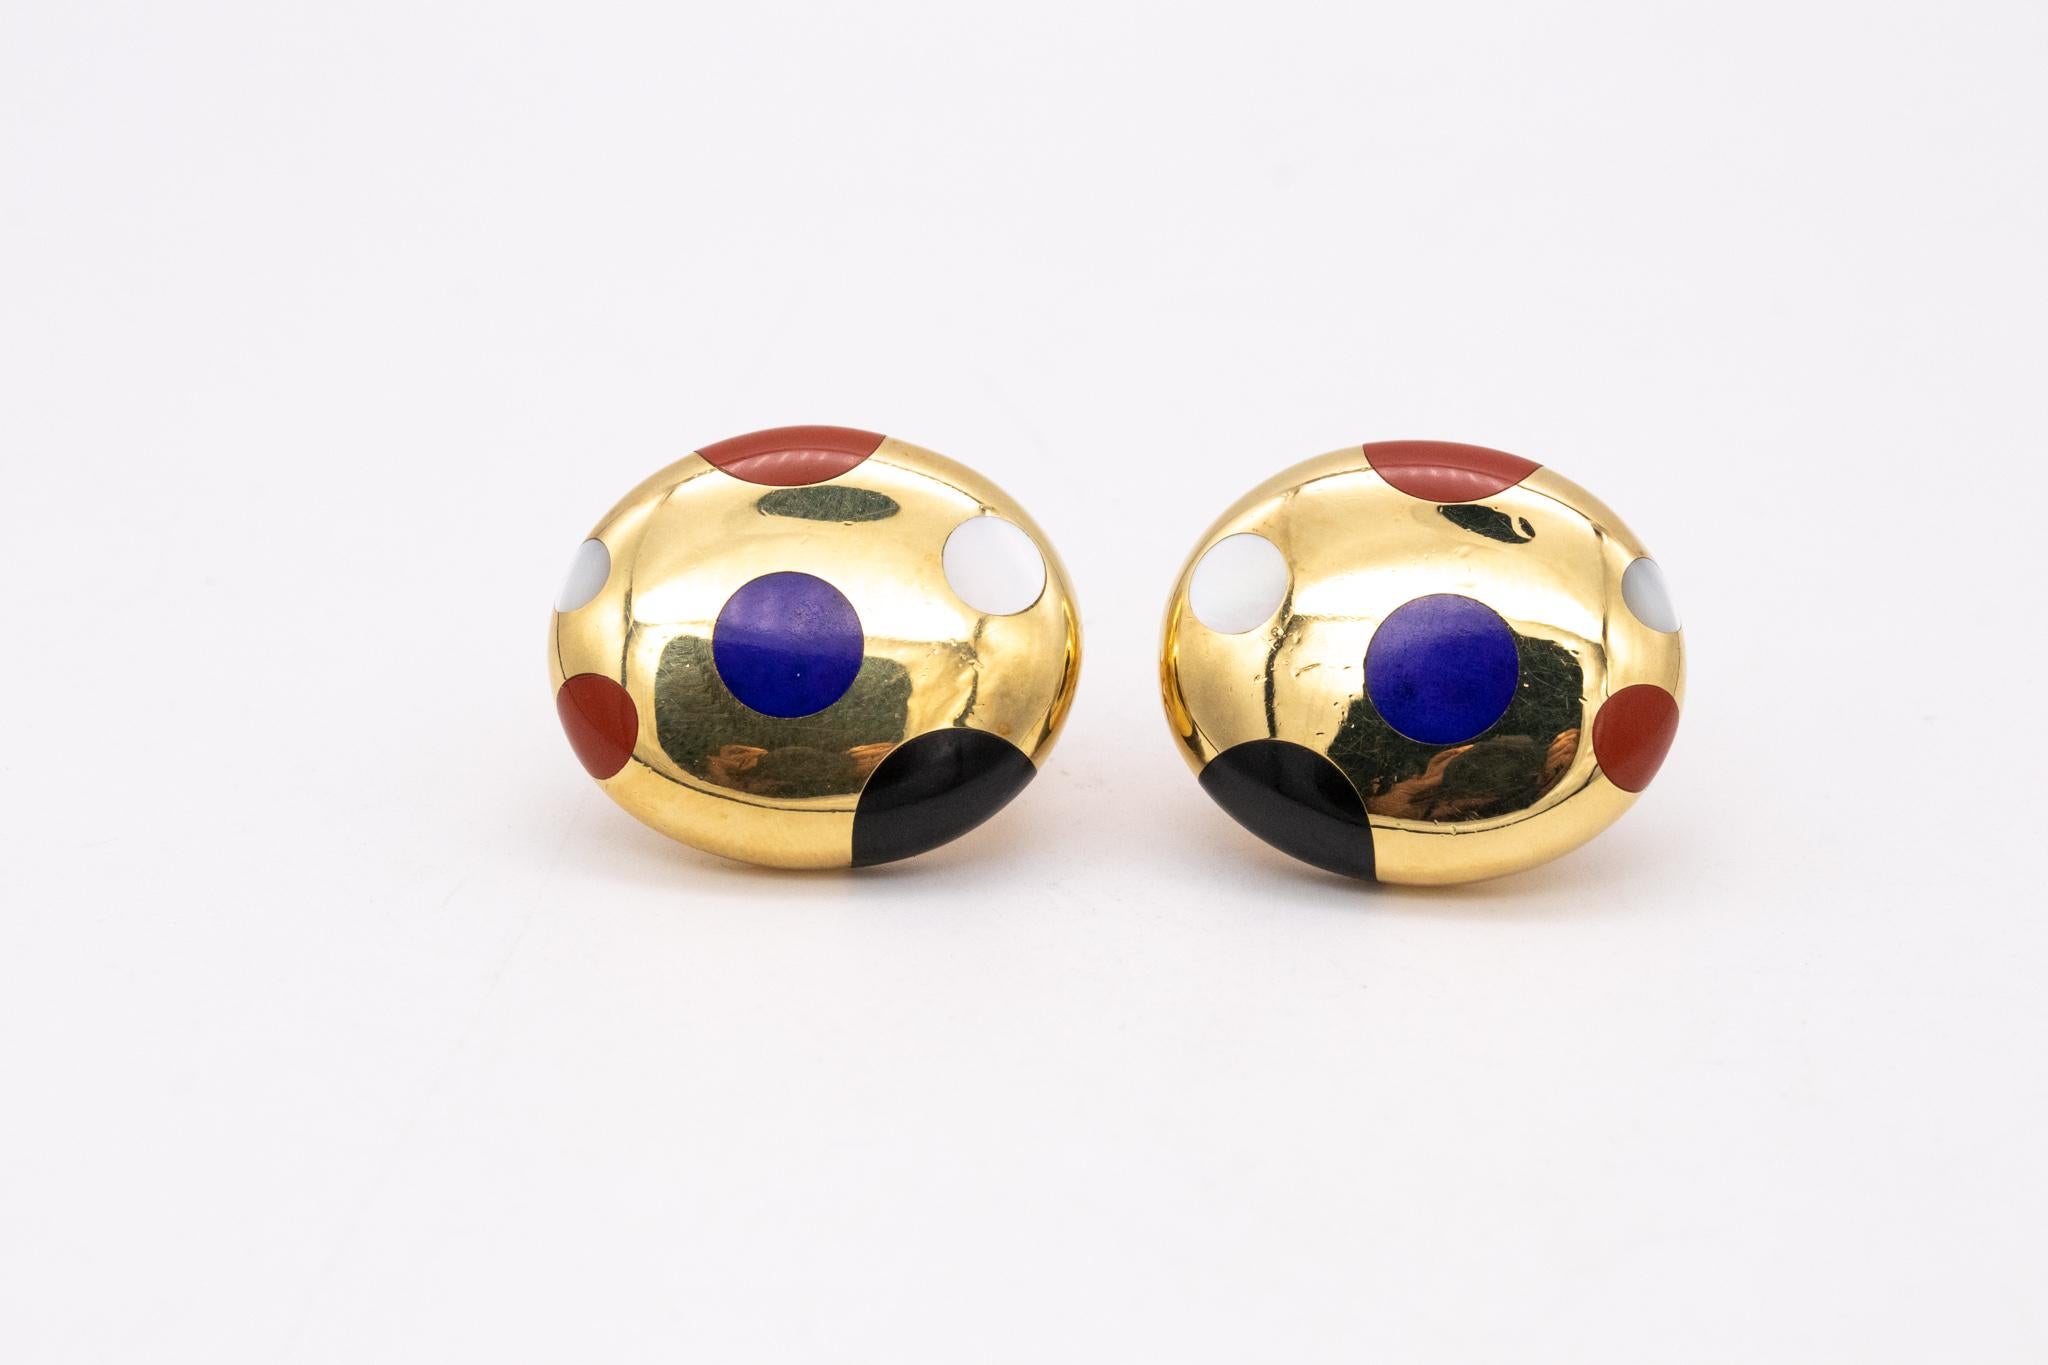 Pair of colorful earrings designed by Angela Cummings for Tiffany & Co.

Rare and iconic pieces, created in New York city by Angela Cummings at the Tiffany studios back in the 1970's. These earrings have been crafted in solid yellow gold of 18